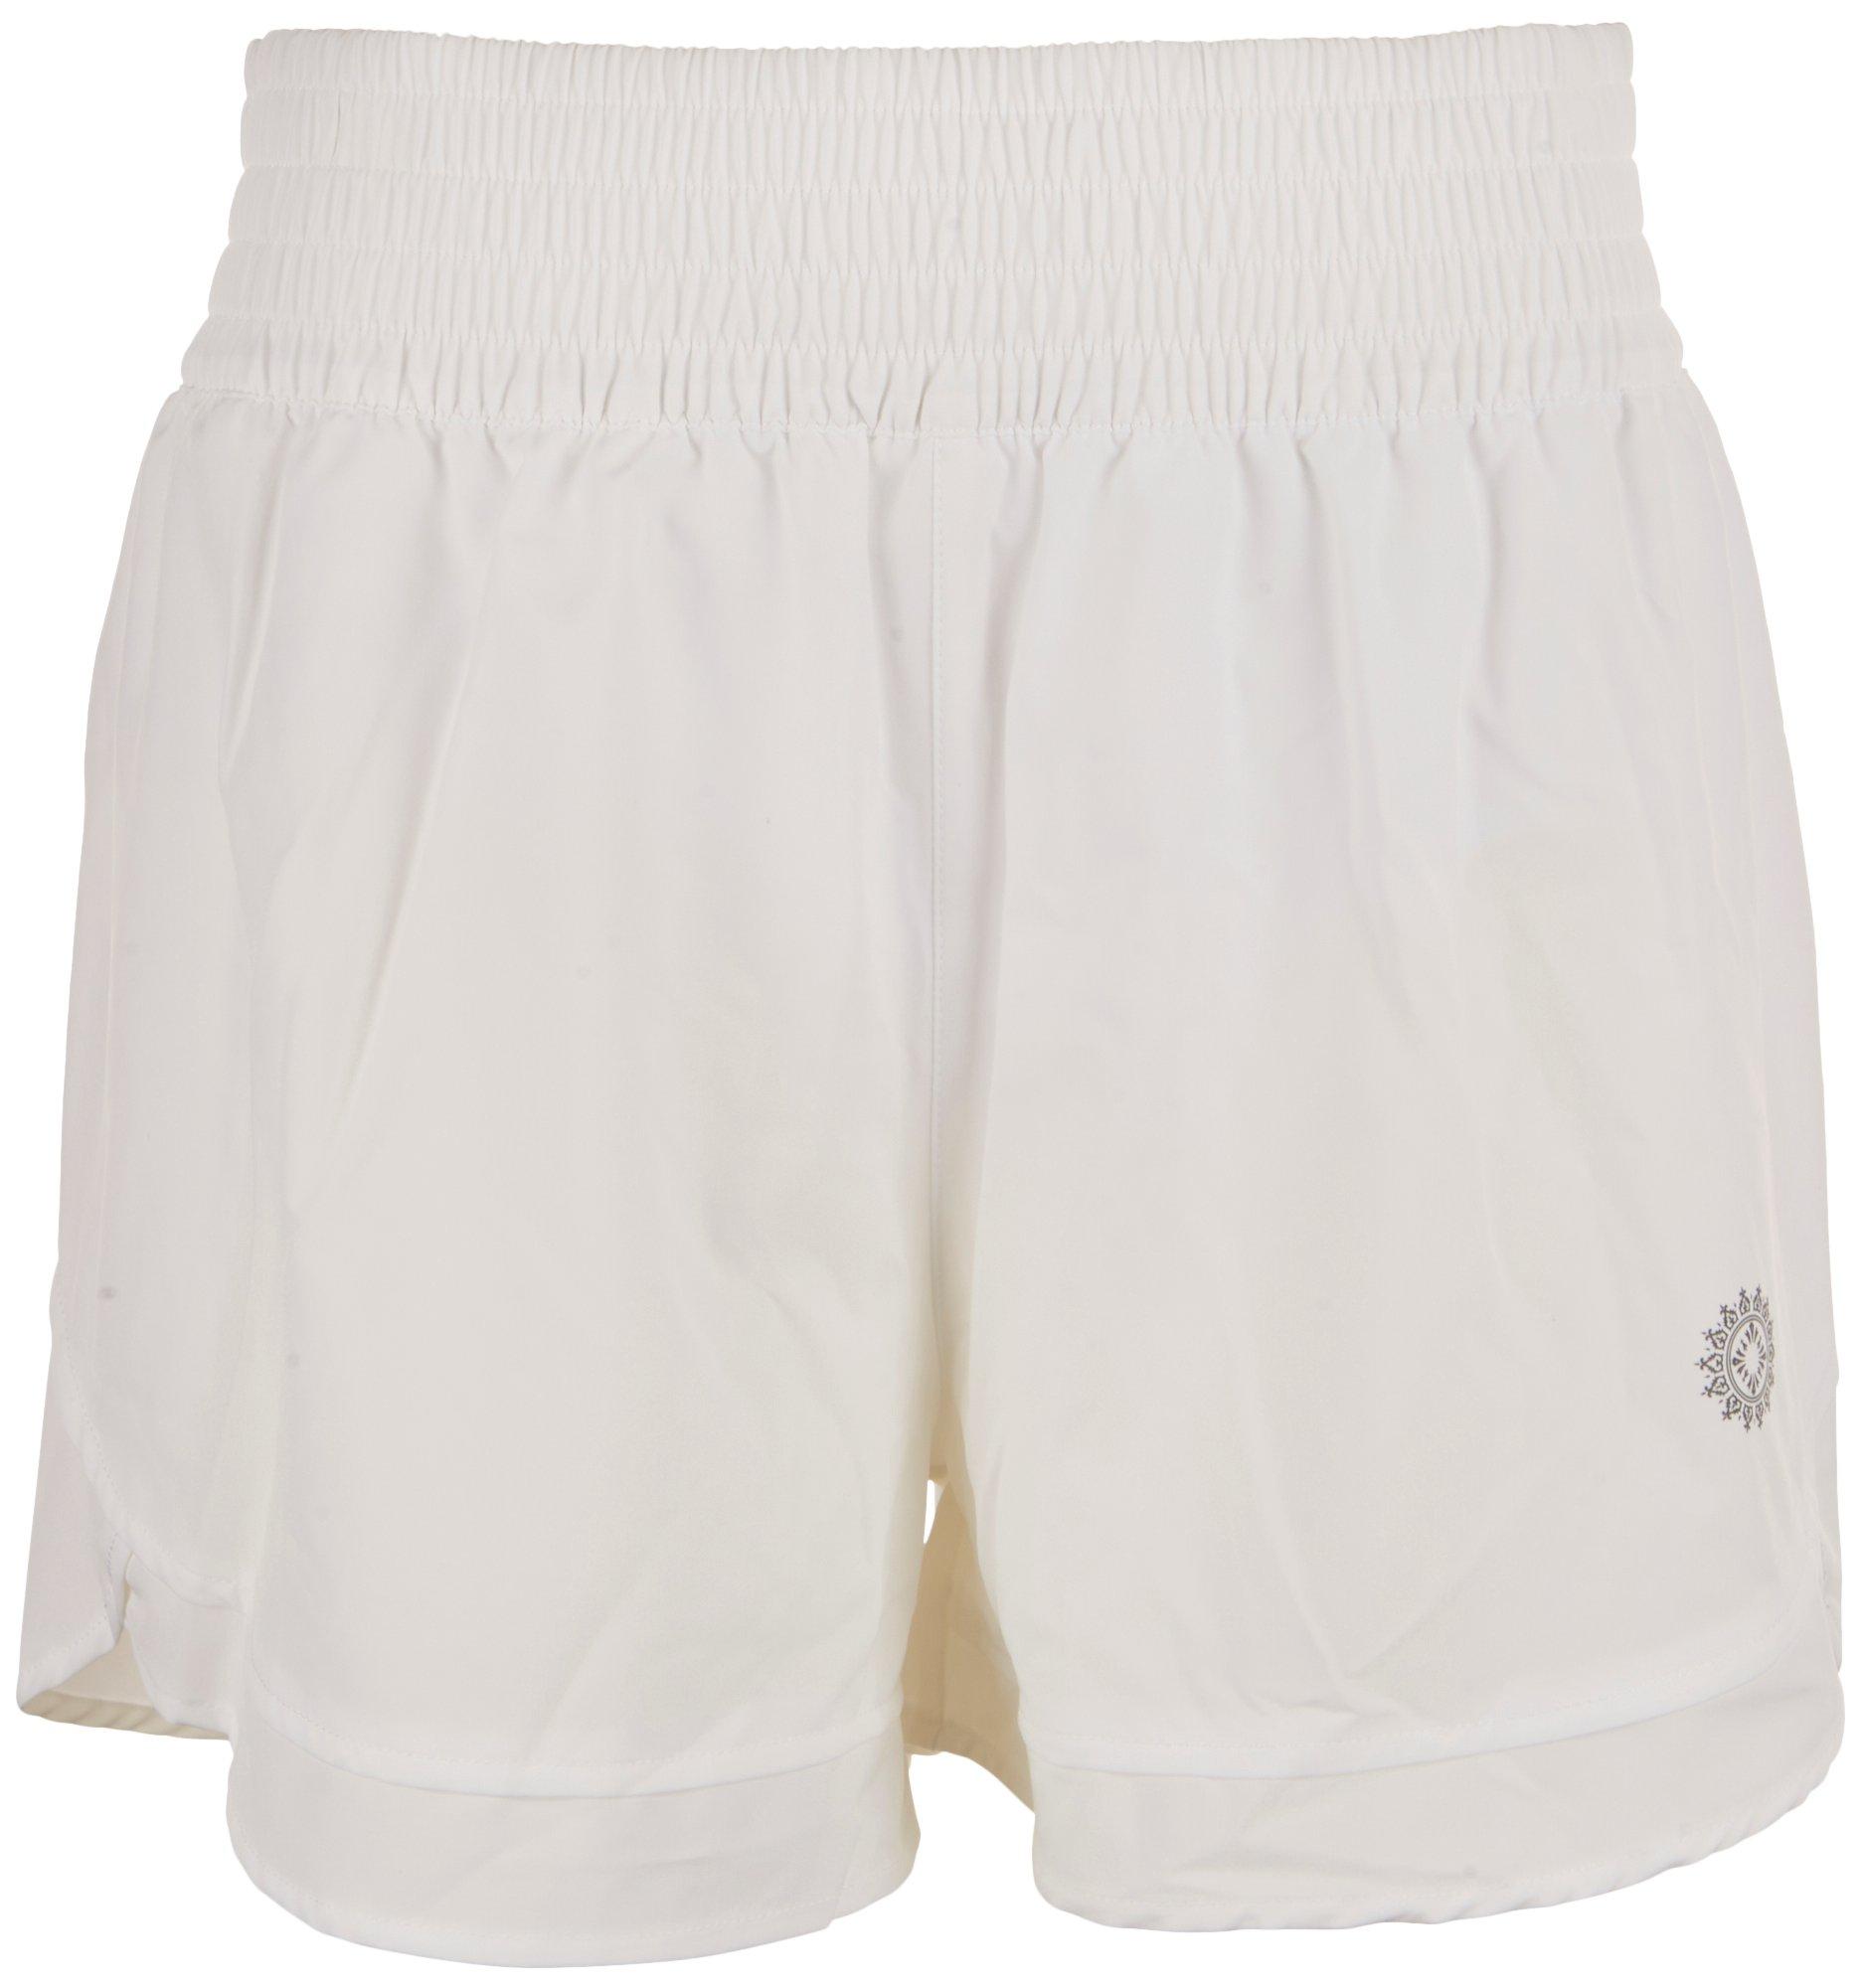 Womens 4 in. Solid Woven Shorts